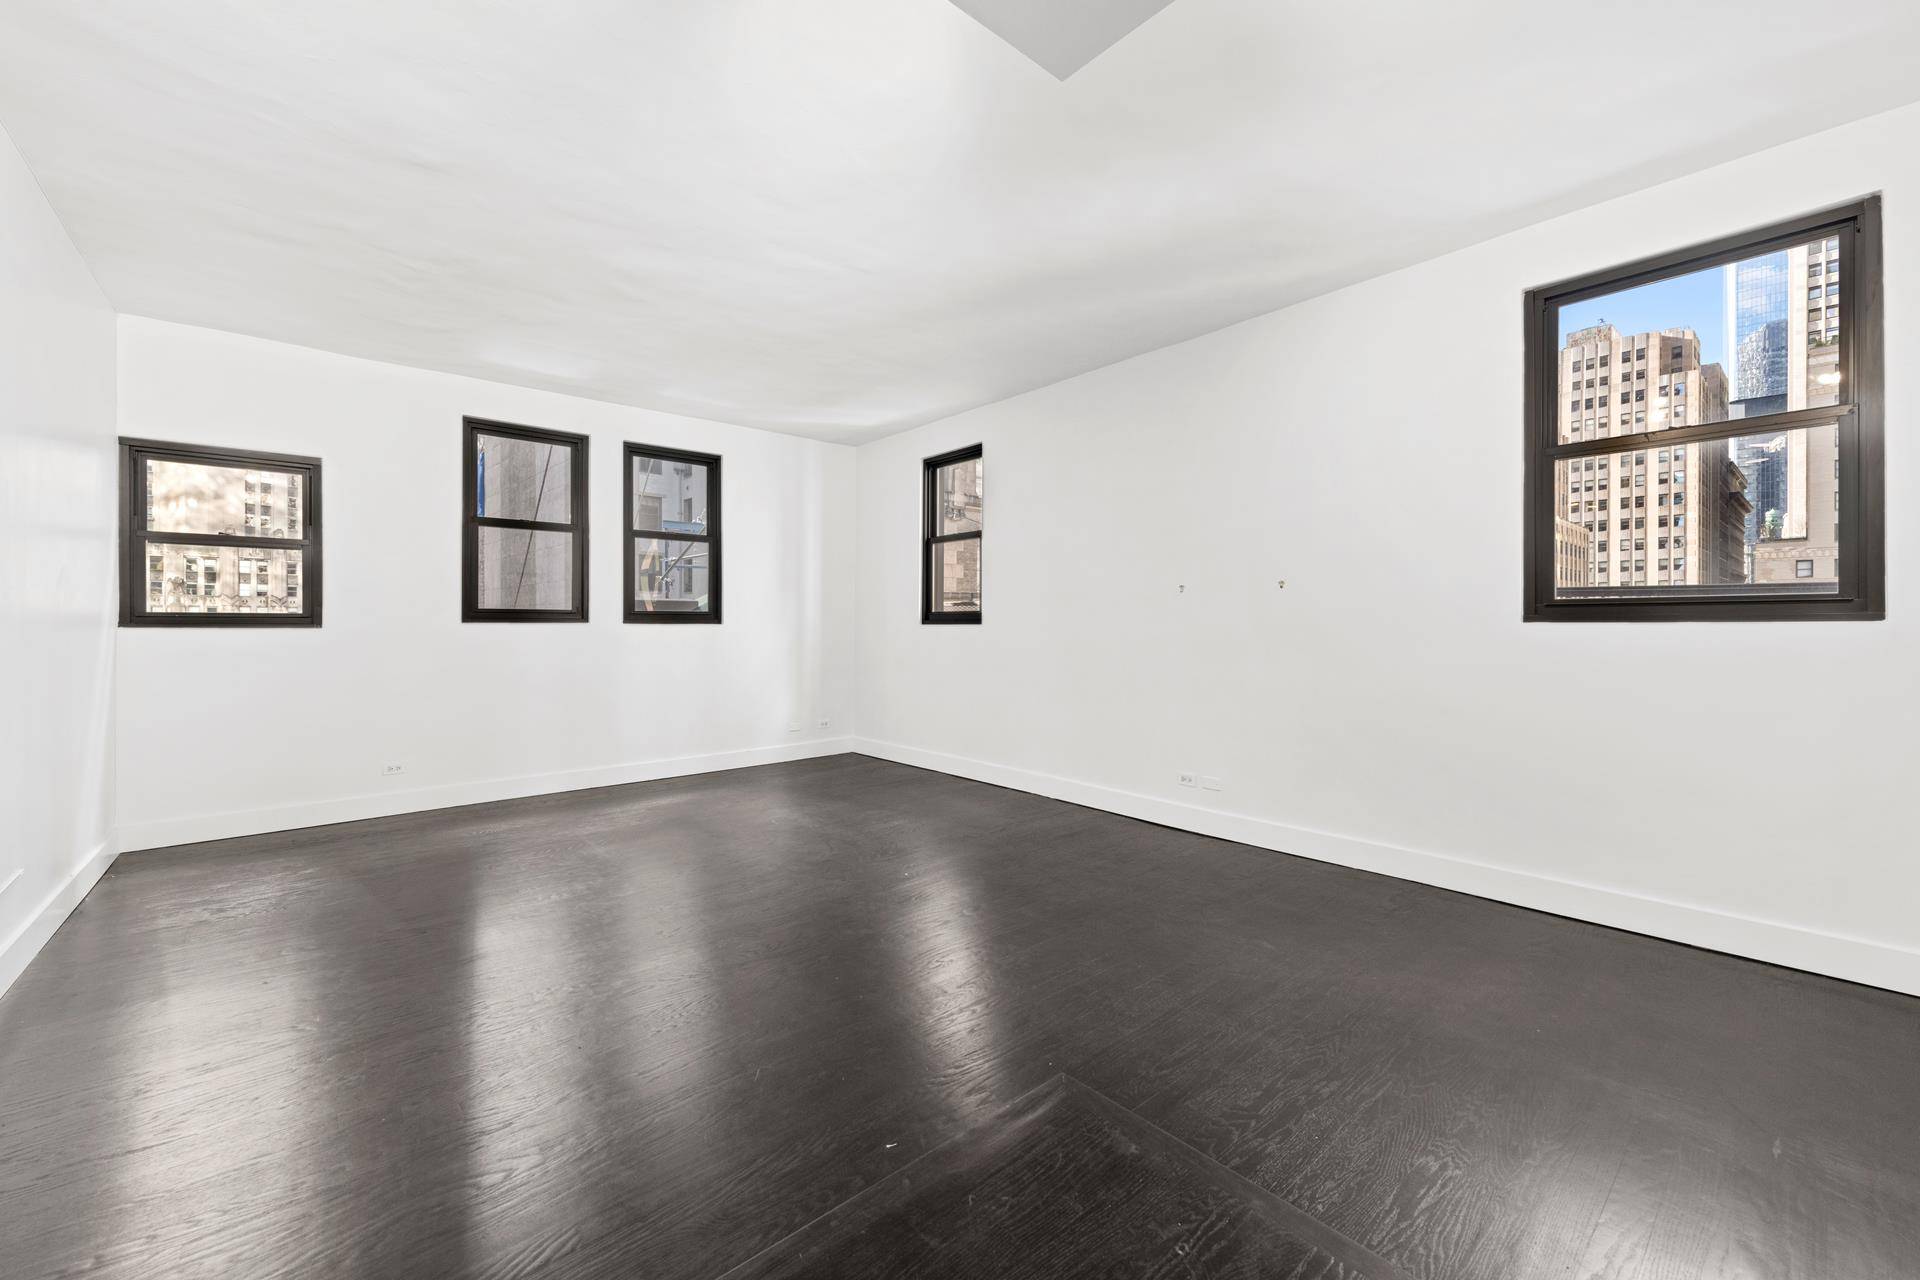 Welcome home to this beautifully renovated Penthouse loft near Wall Street in the heart Financial District.